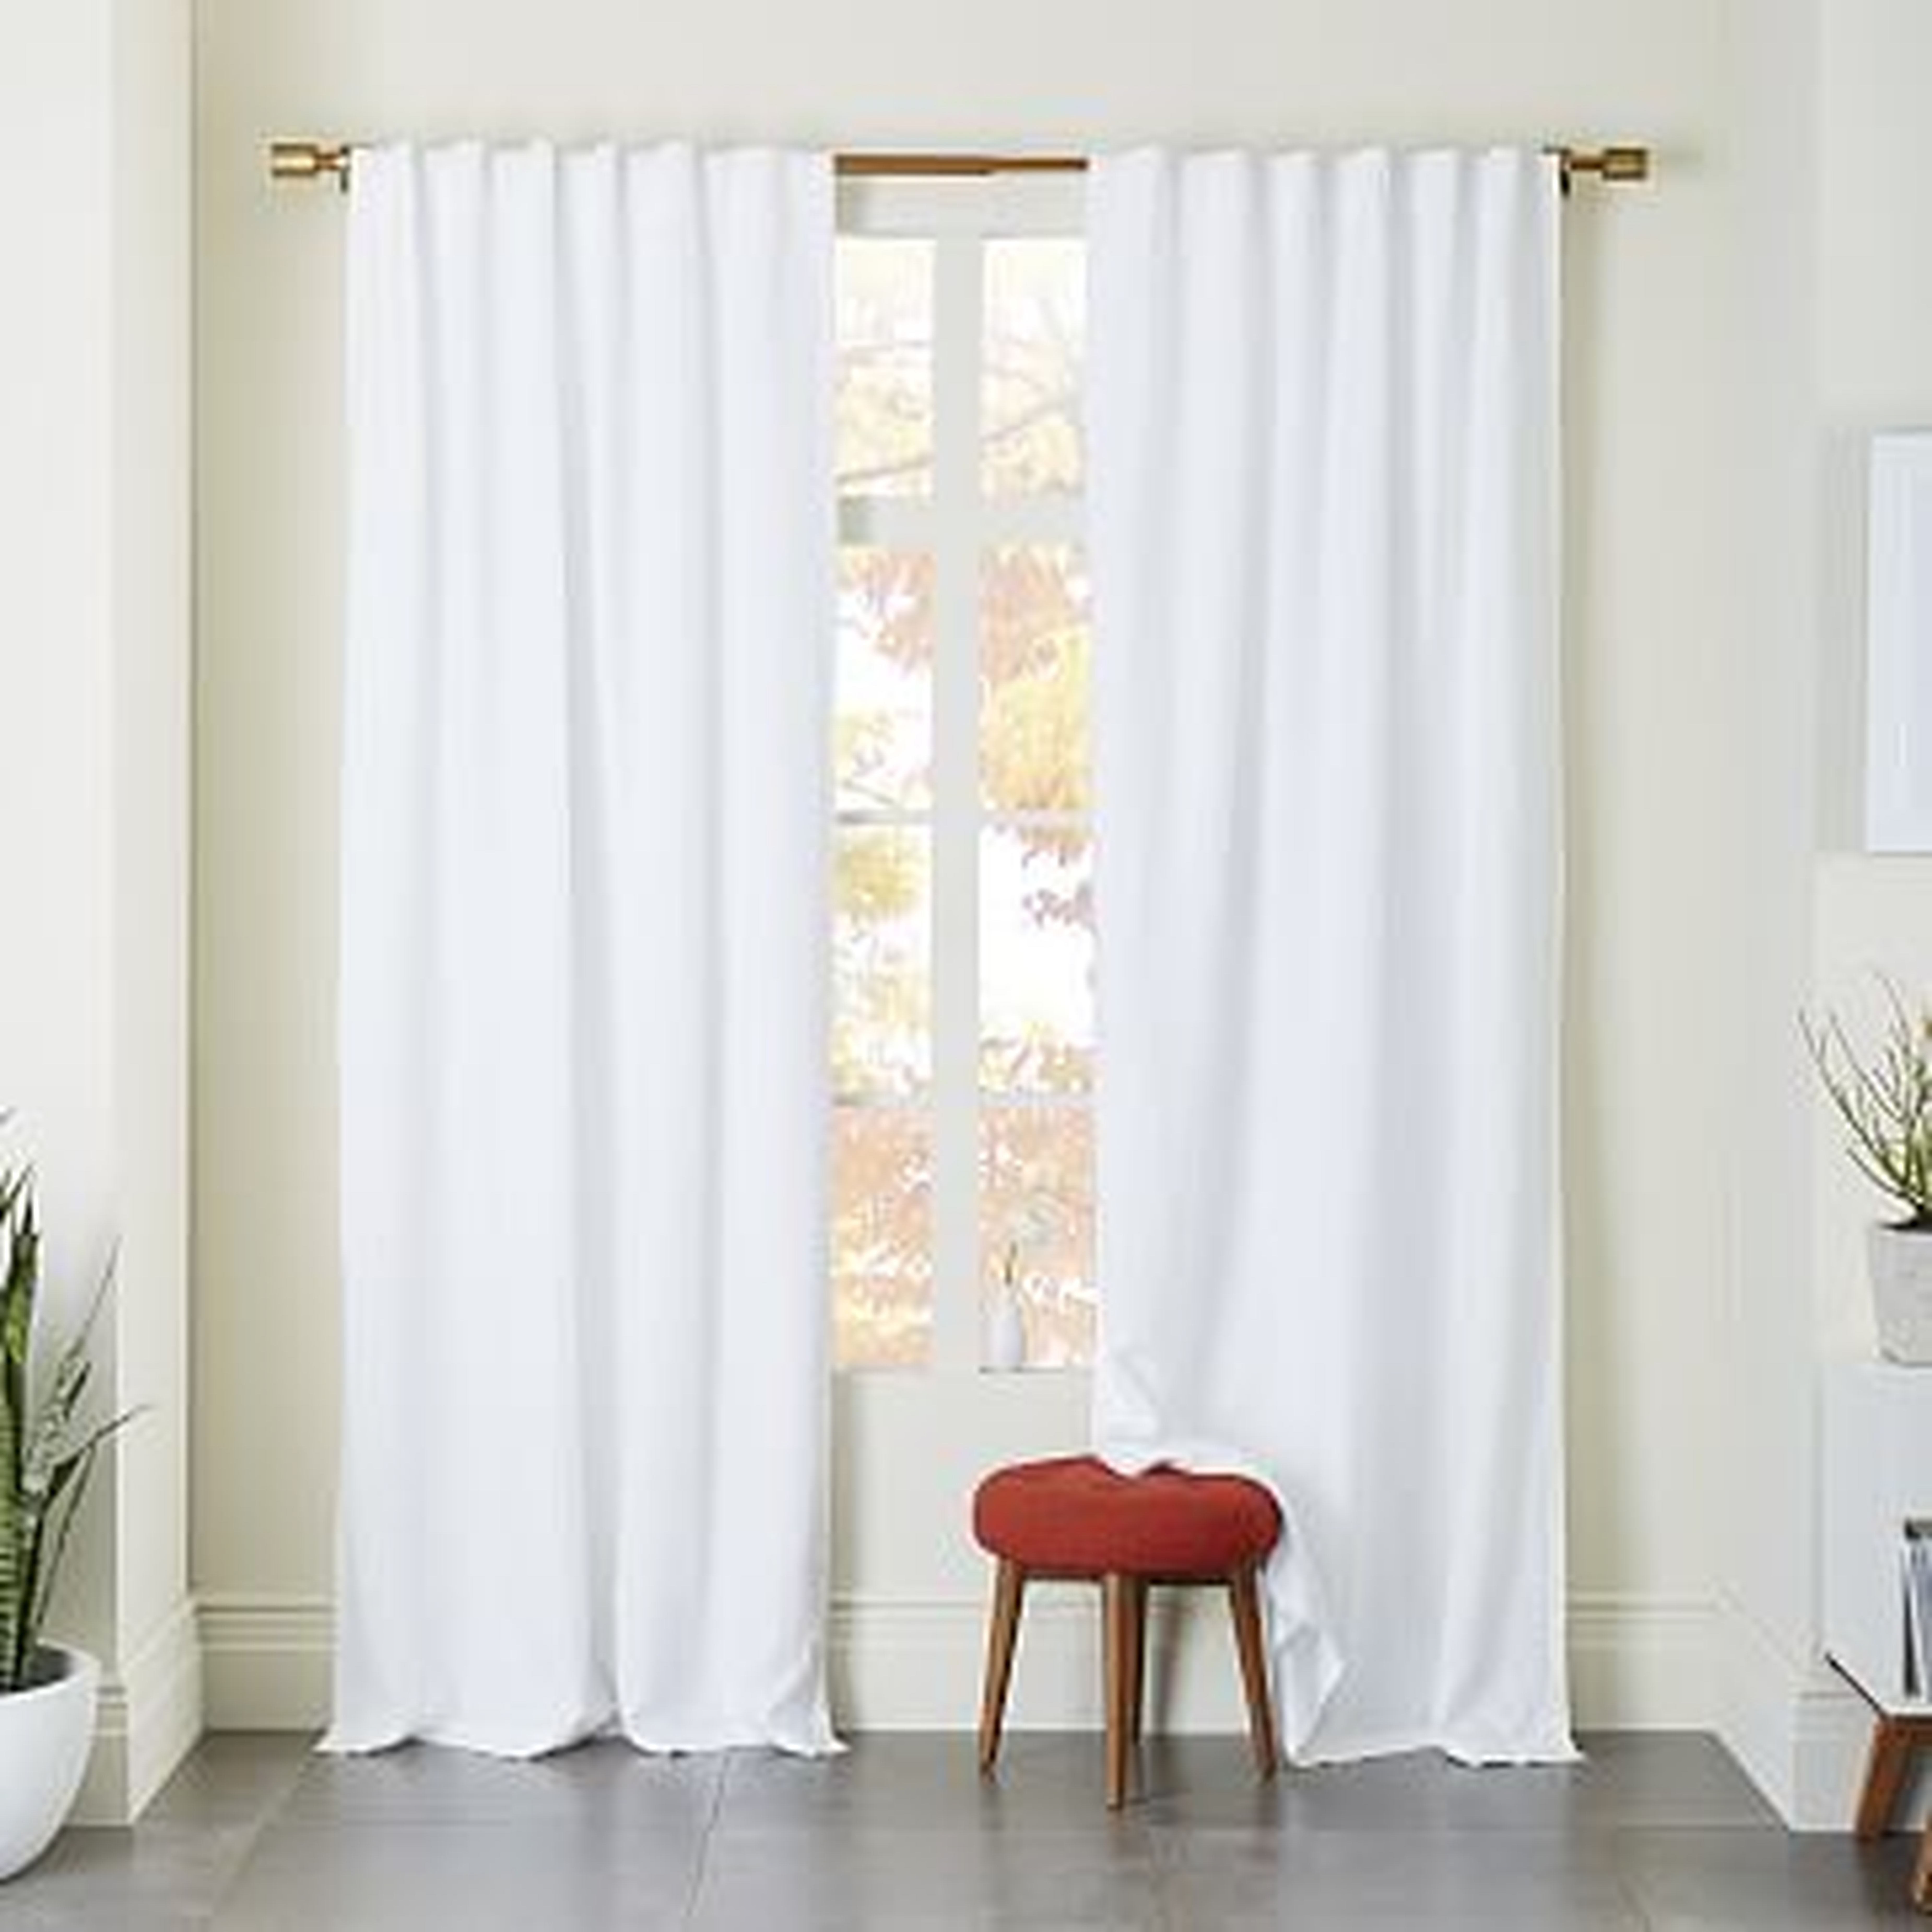 Belgian Flax Linen Curtain With Blackout, Set of 2, White, 48"x96" - West Elm